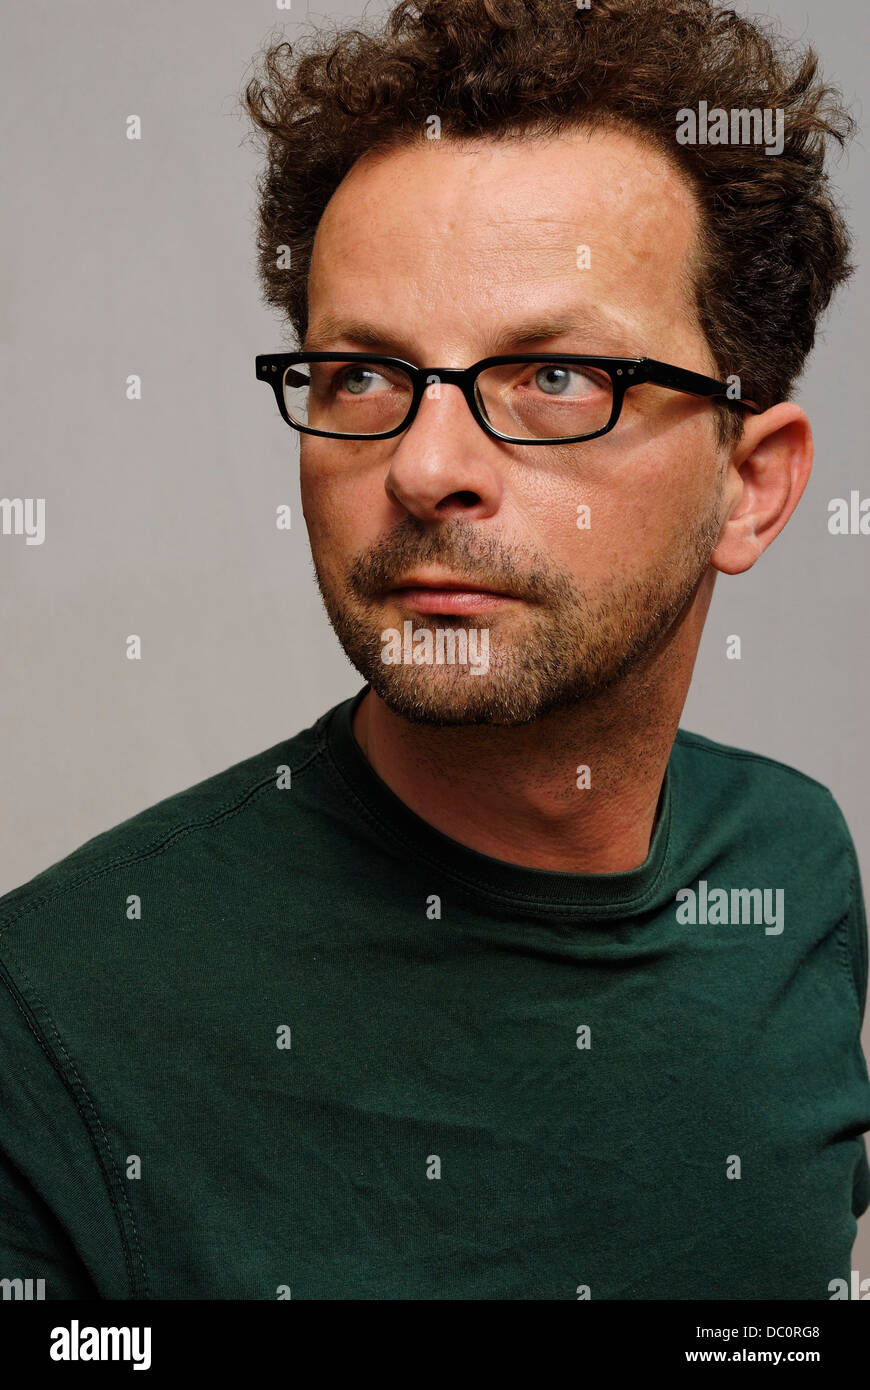 A man with glasses, a green t.shirt and unshaven Stock Photo